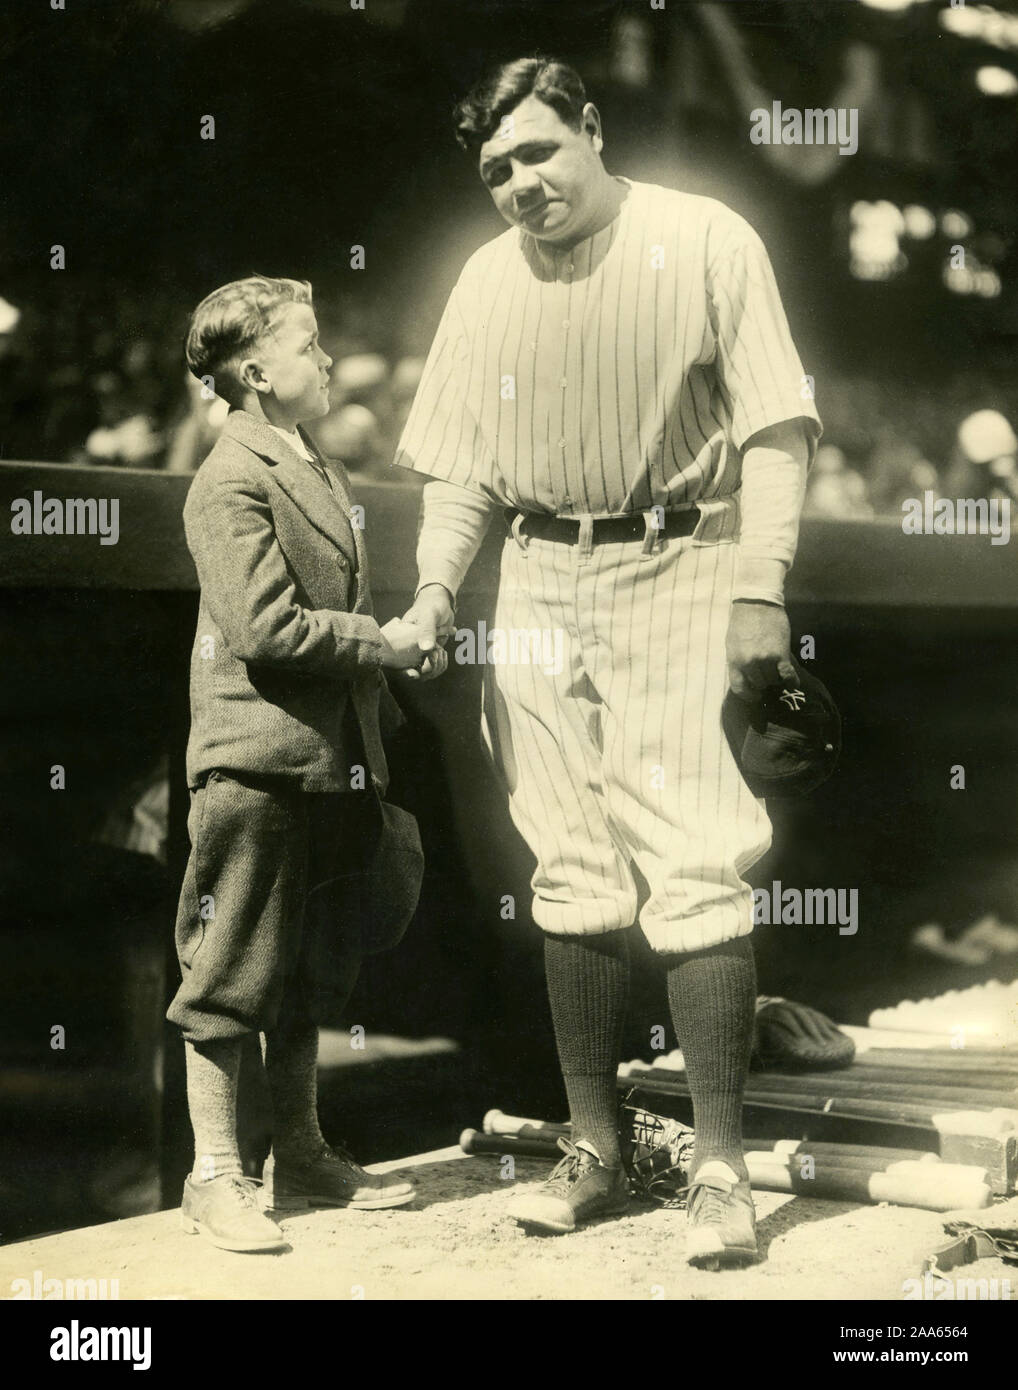 Legendary New York Yankee baseball player Babe Ruth poses for a photo with a young boy. Stock Photo